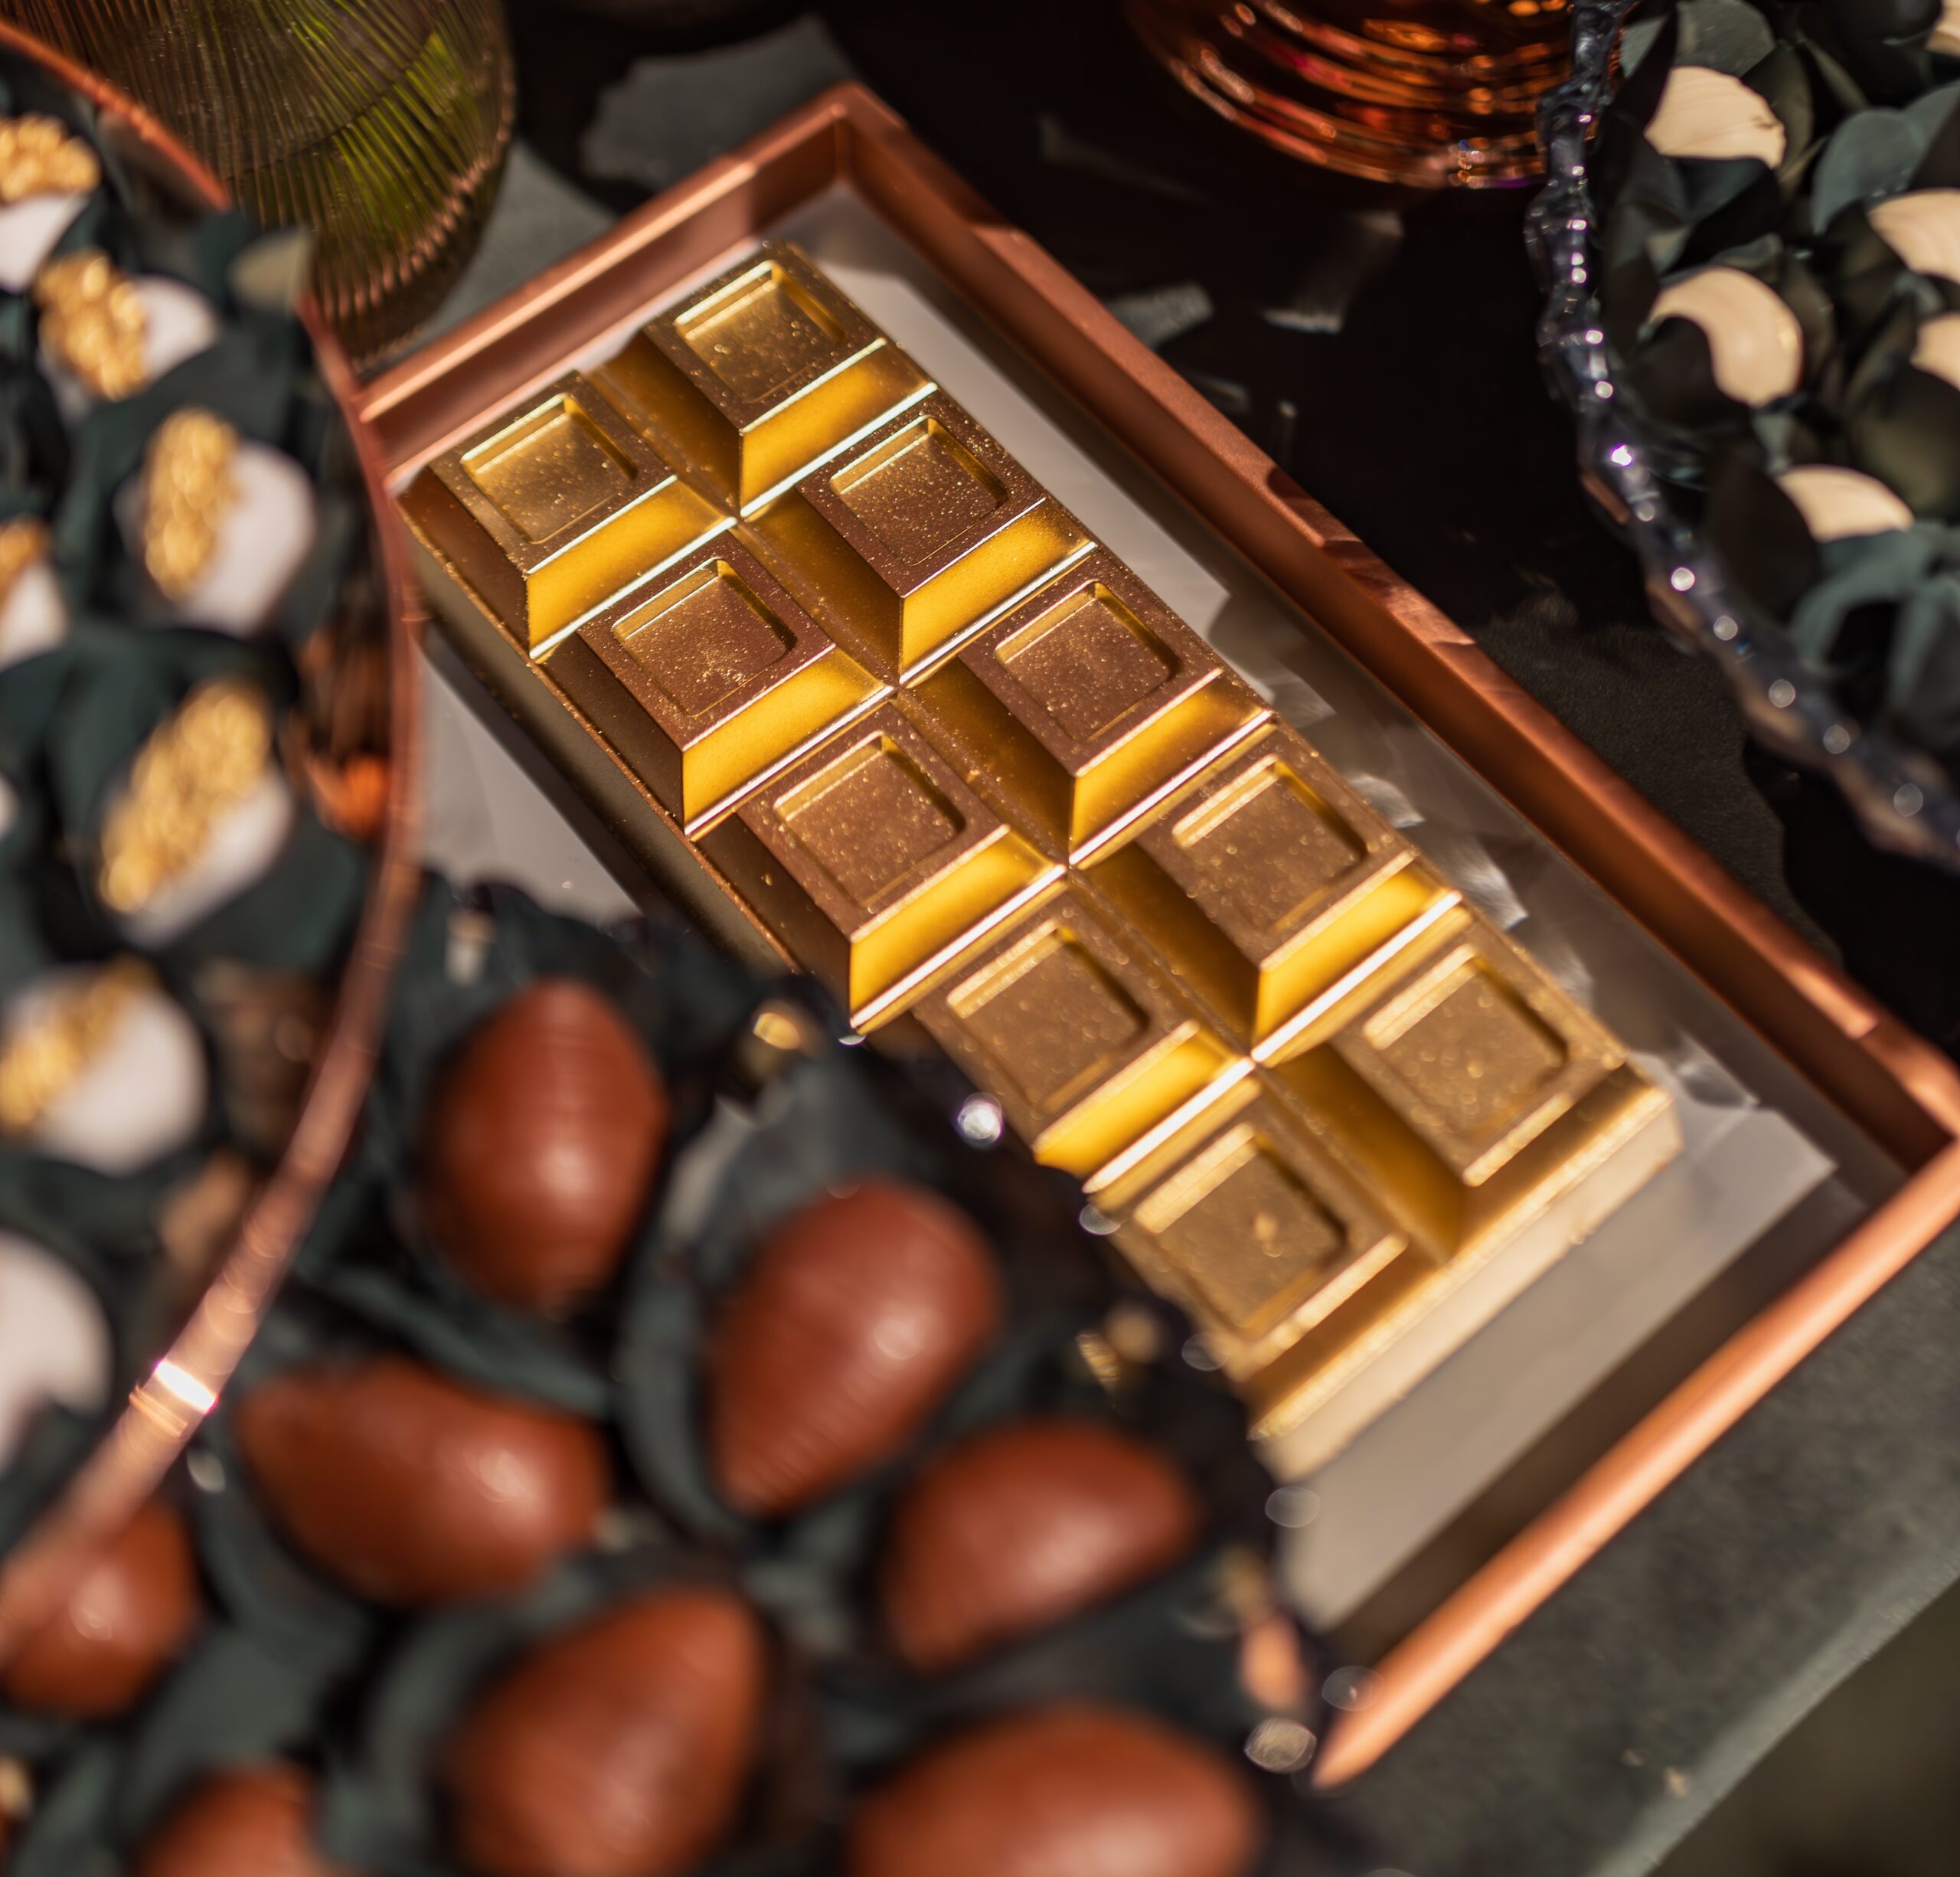 How to Indulge in a Luxurious Chocolate Tasting Experience